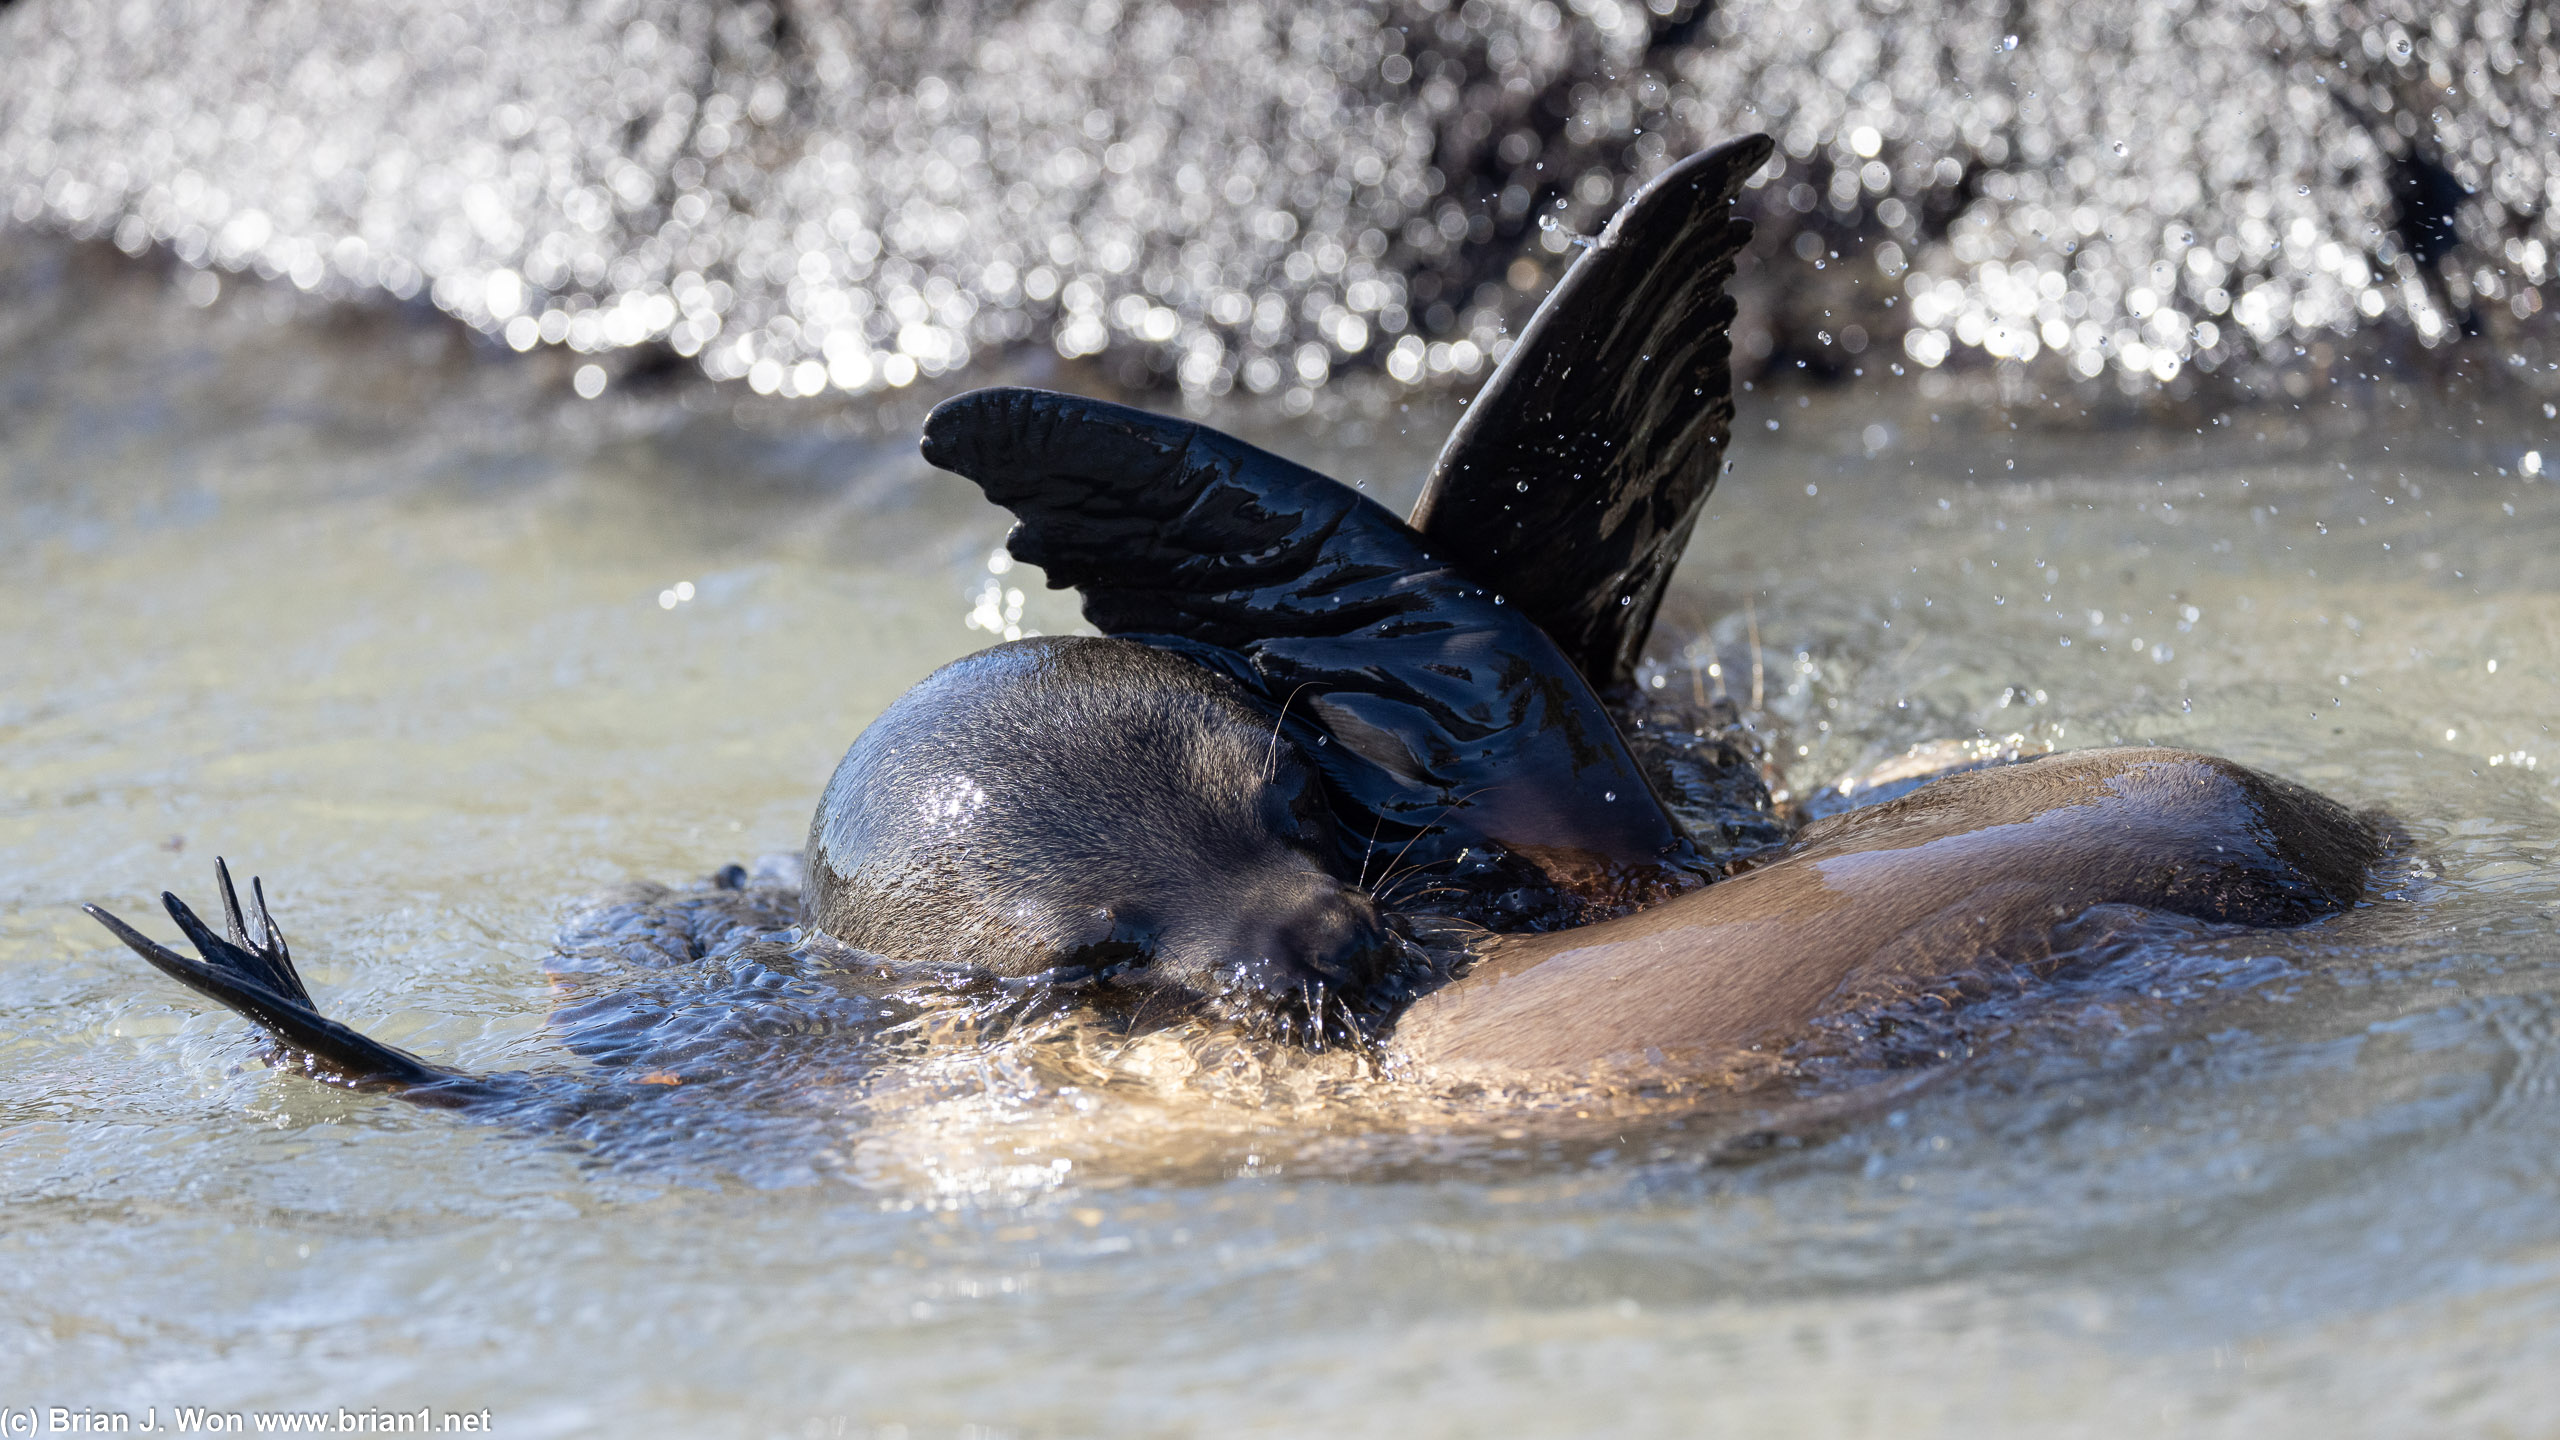 Pair of sea lions playing in the water.